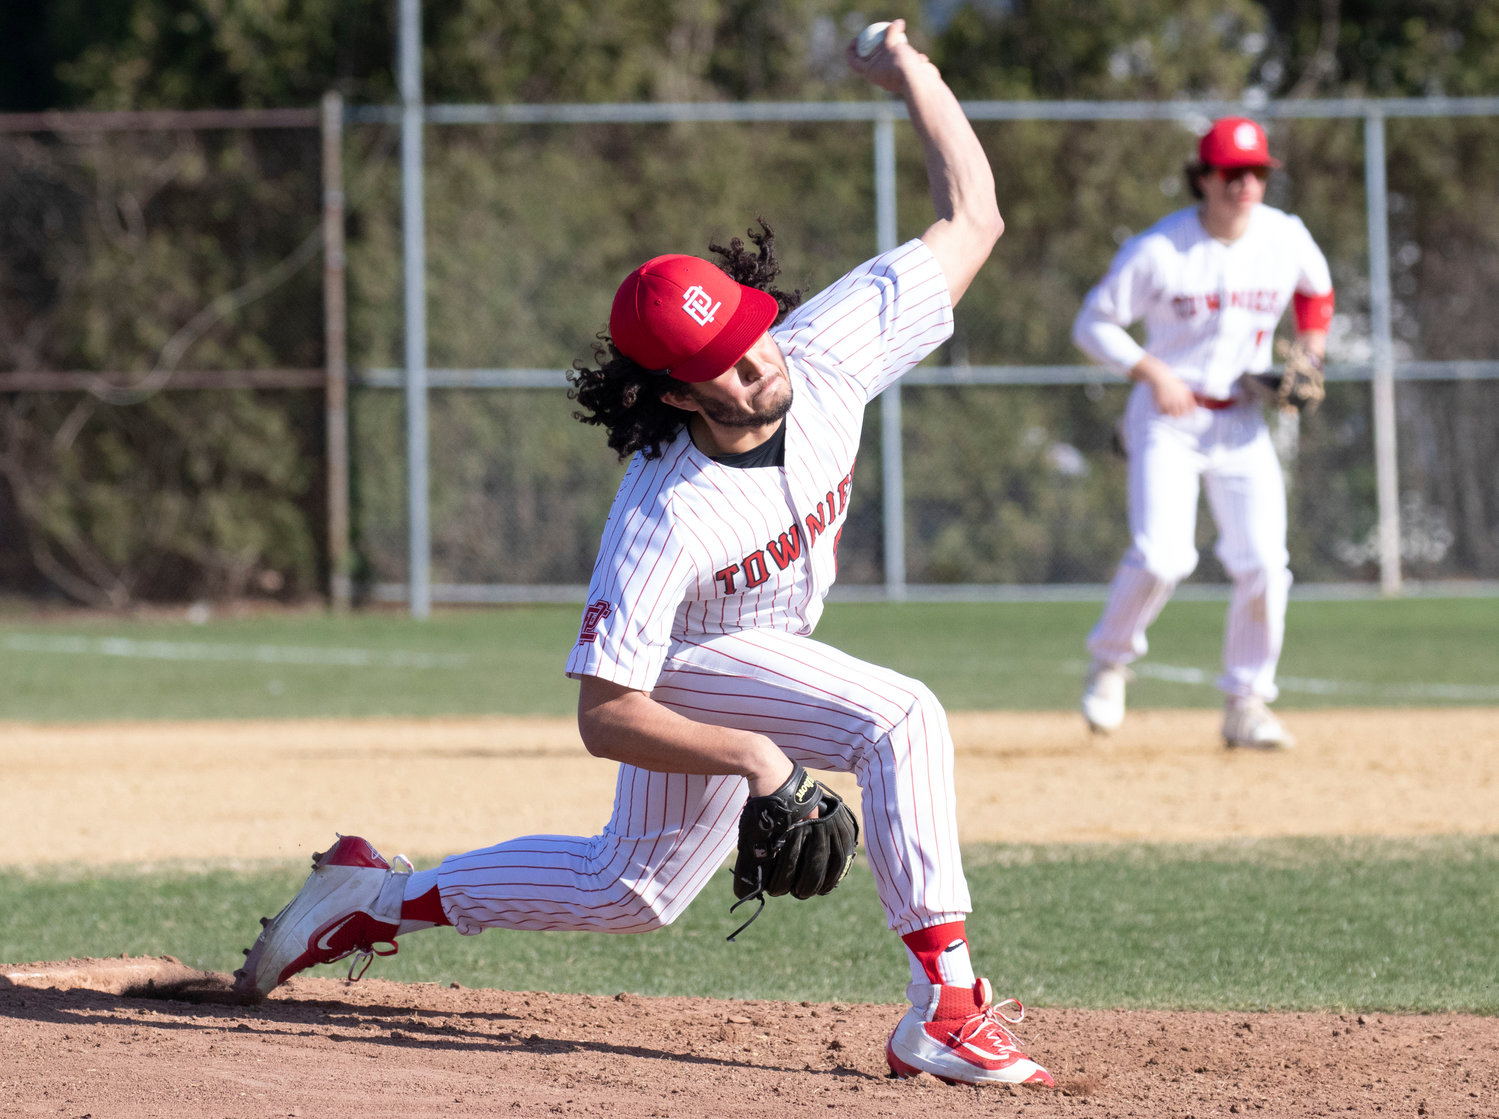 East Providence High School senior starter Elijah Barber delivers a pitch for the Townies in their 2022 Division I season opening contest against Portsmouth on Monday, April 4.